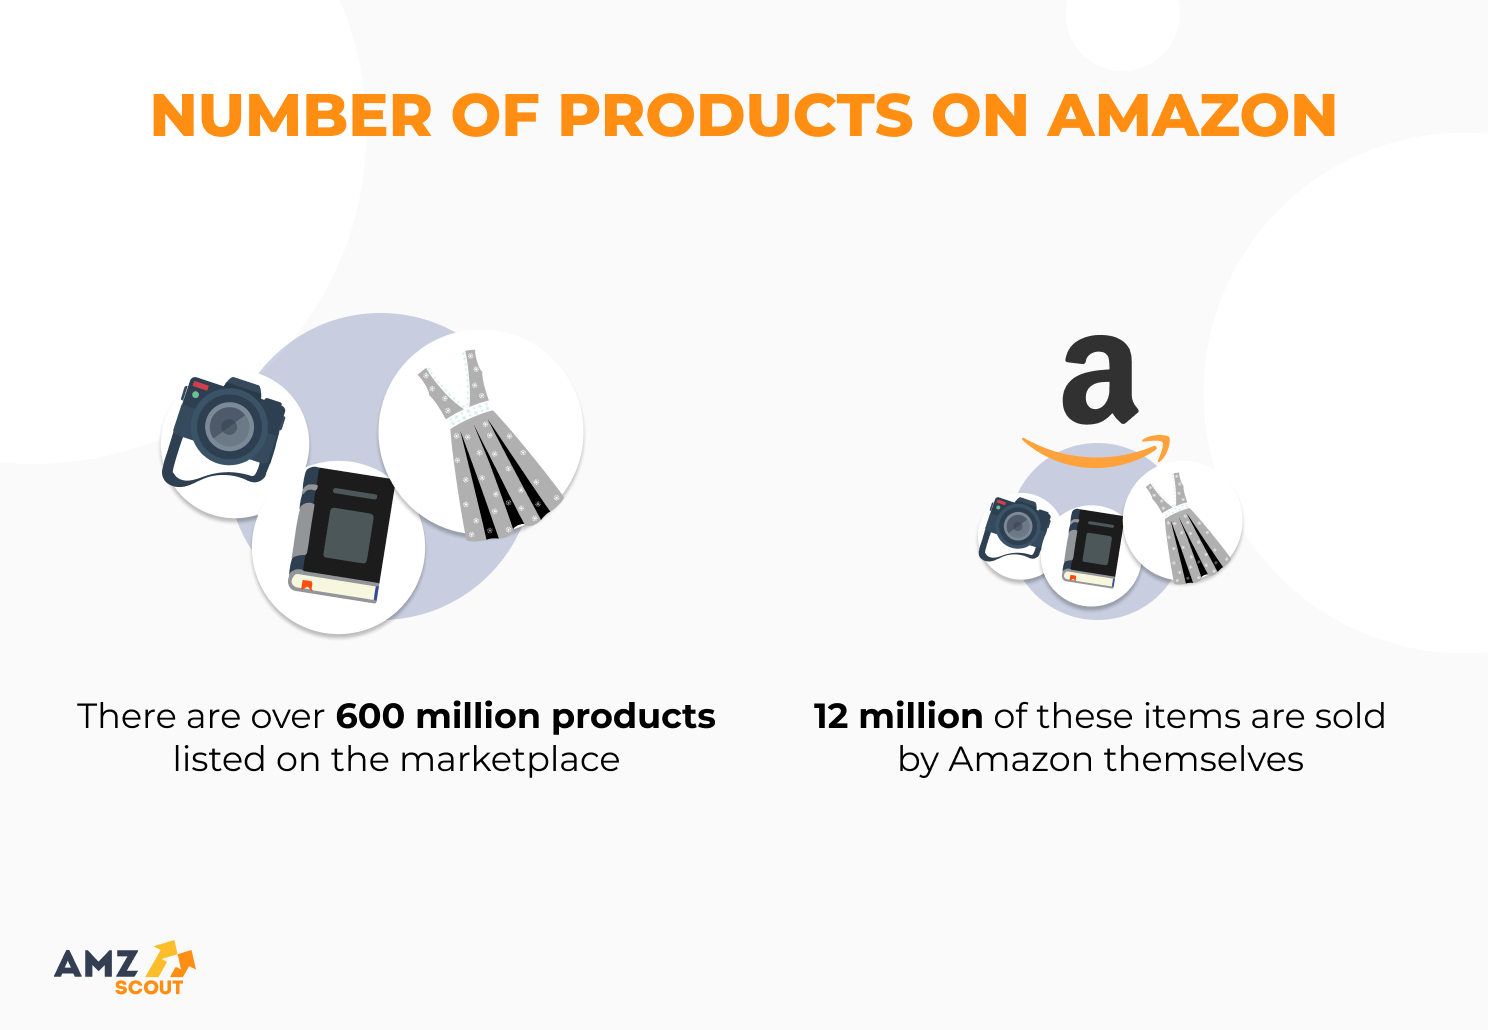 How many products does Amazon sell